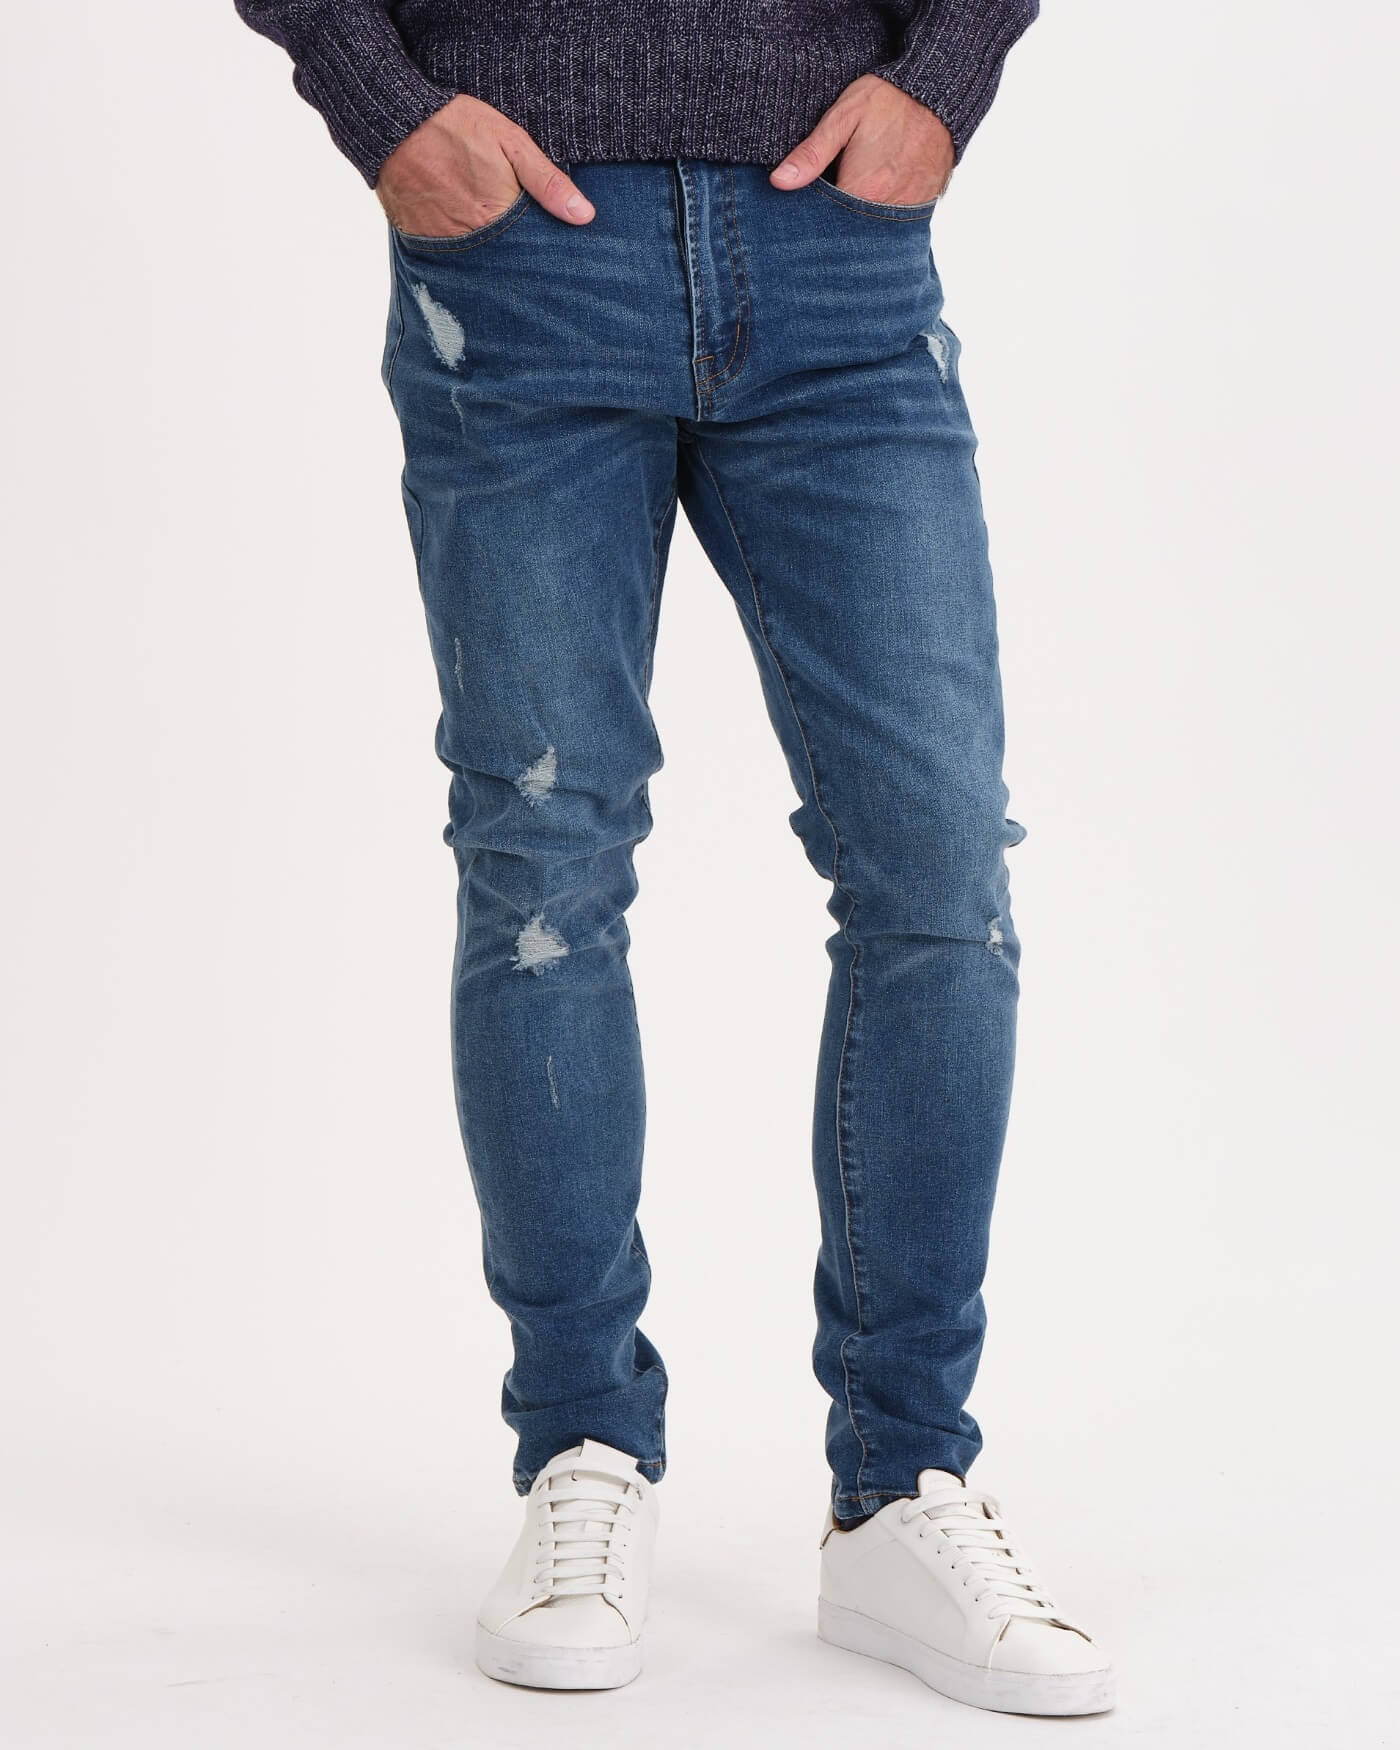 Do Slim Jeans Stretch? The Truth About Slim Fit Jeans – Maves Apparel